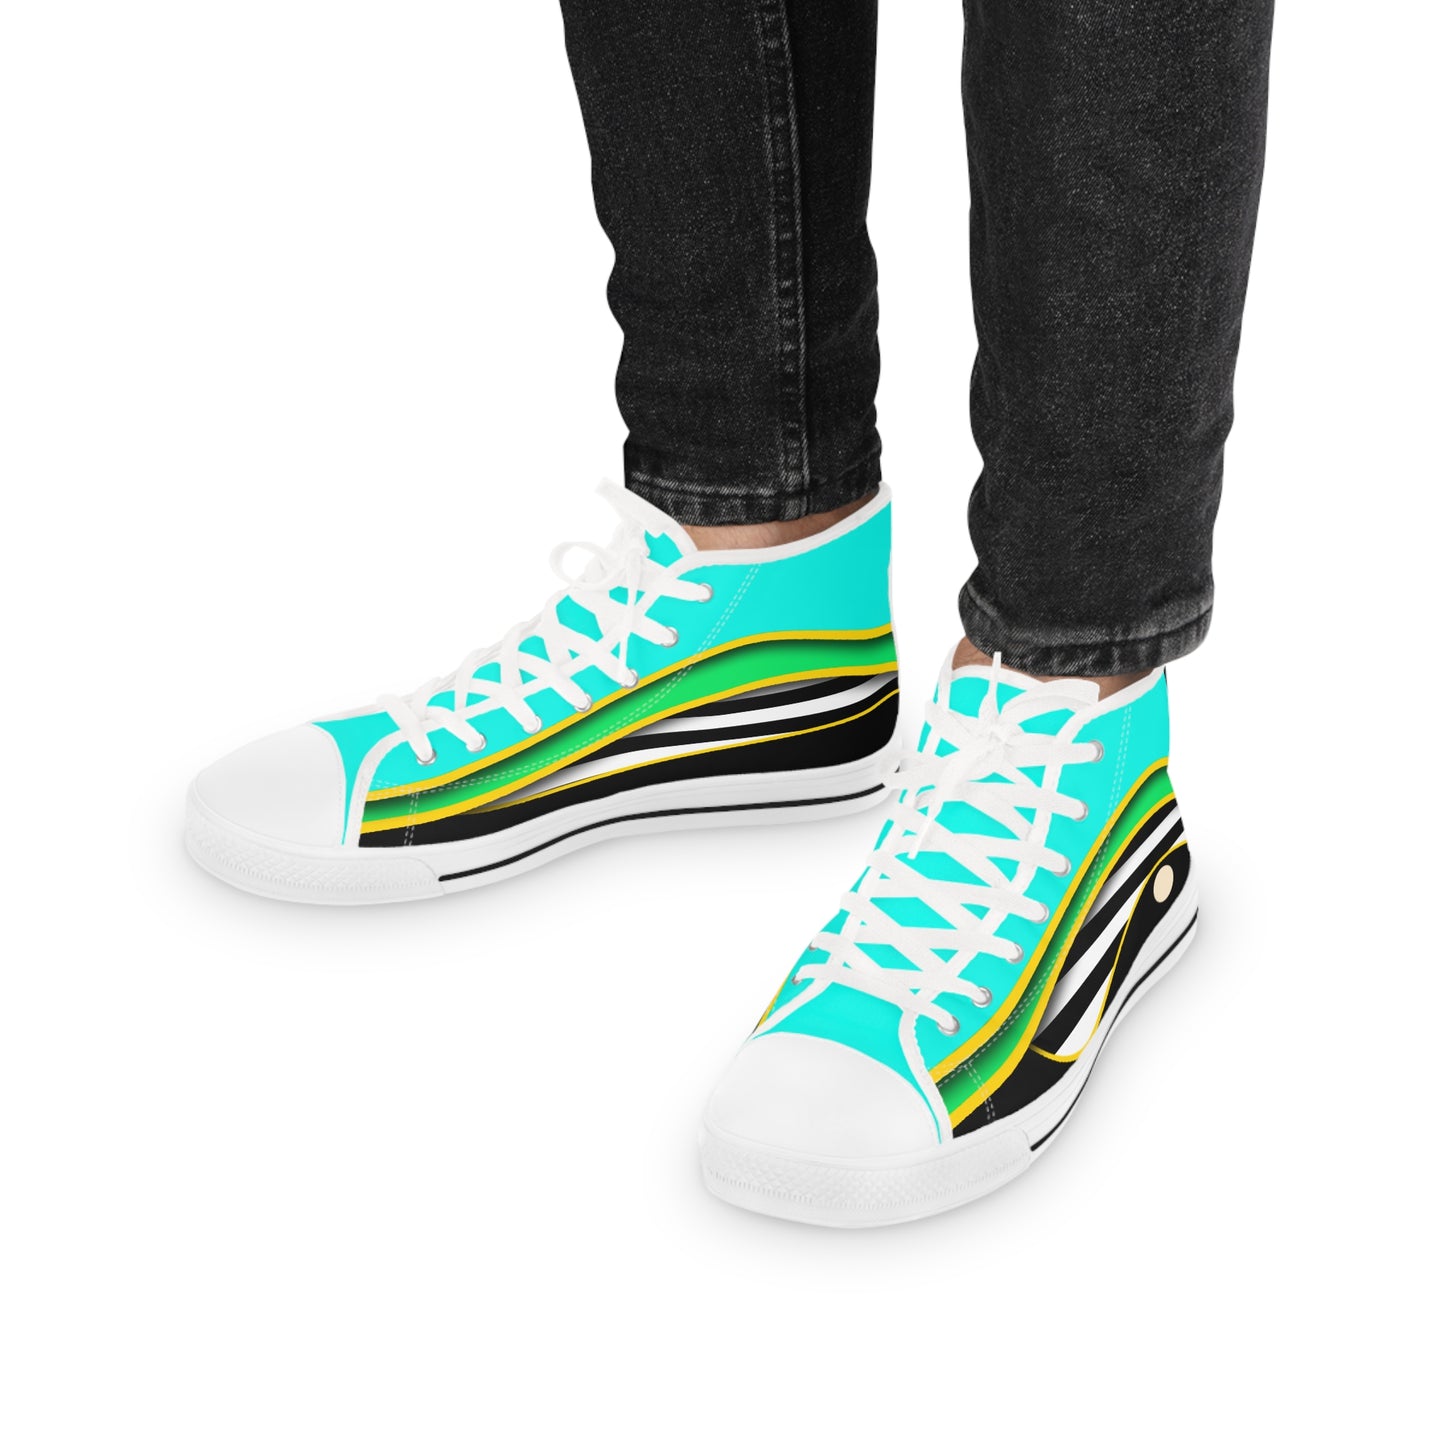 Men's High Top Graphics Sneakers - 10001 US 14 White sole